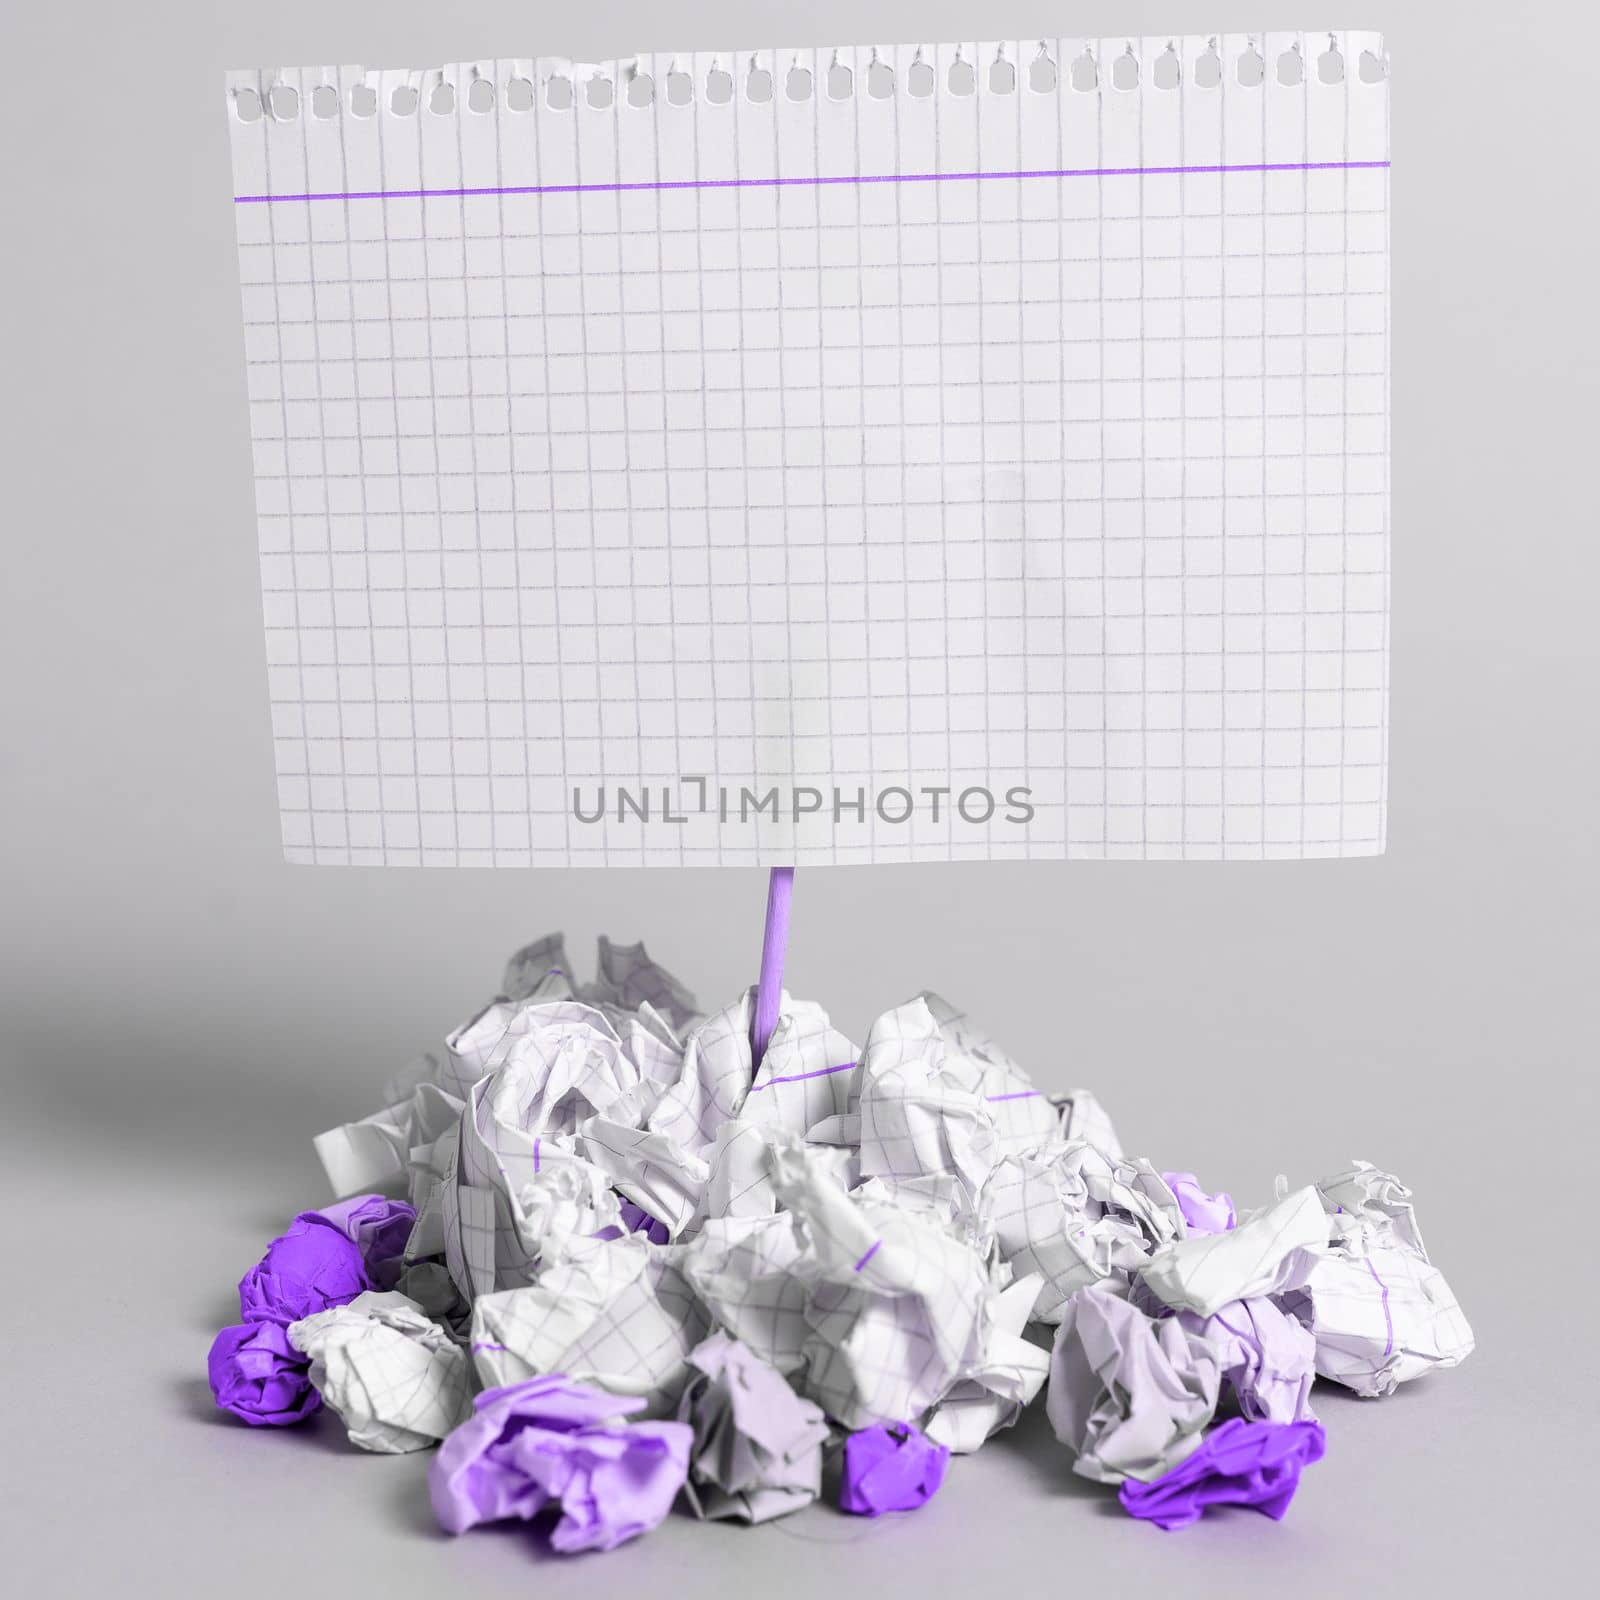 Paper Wraps Placed Around Important Information. Crumpled Memos With Data.